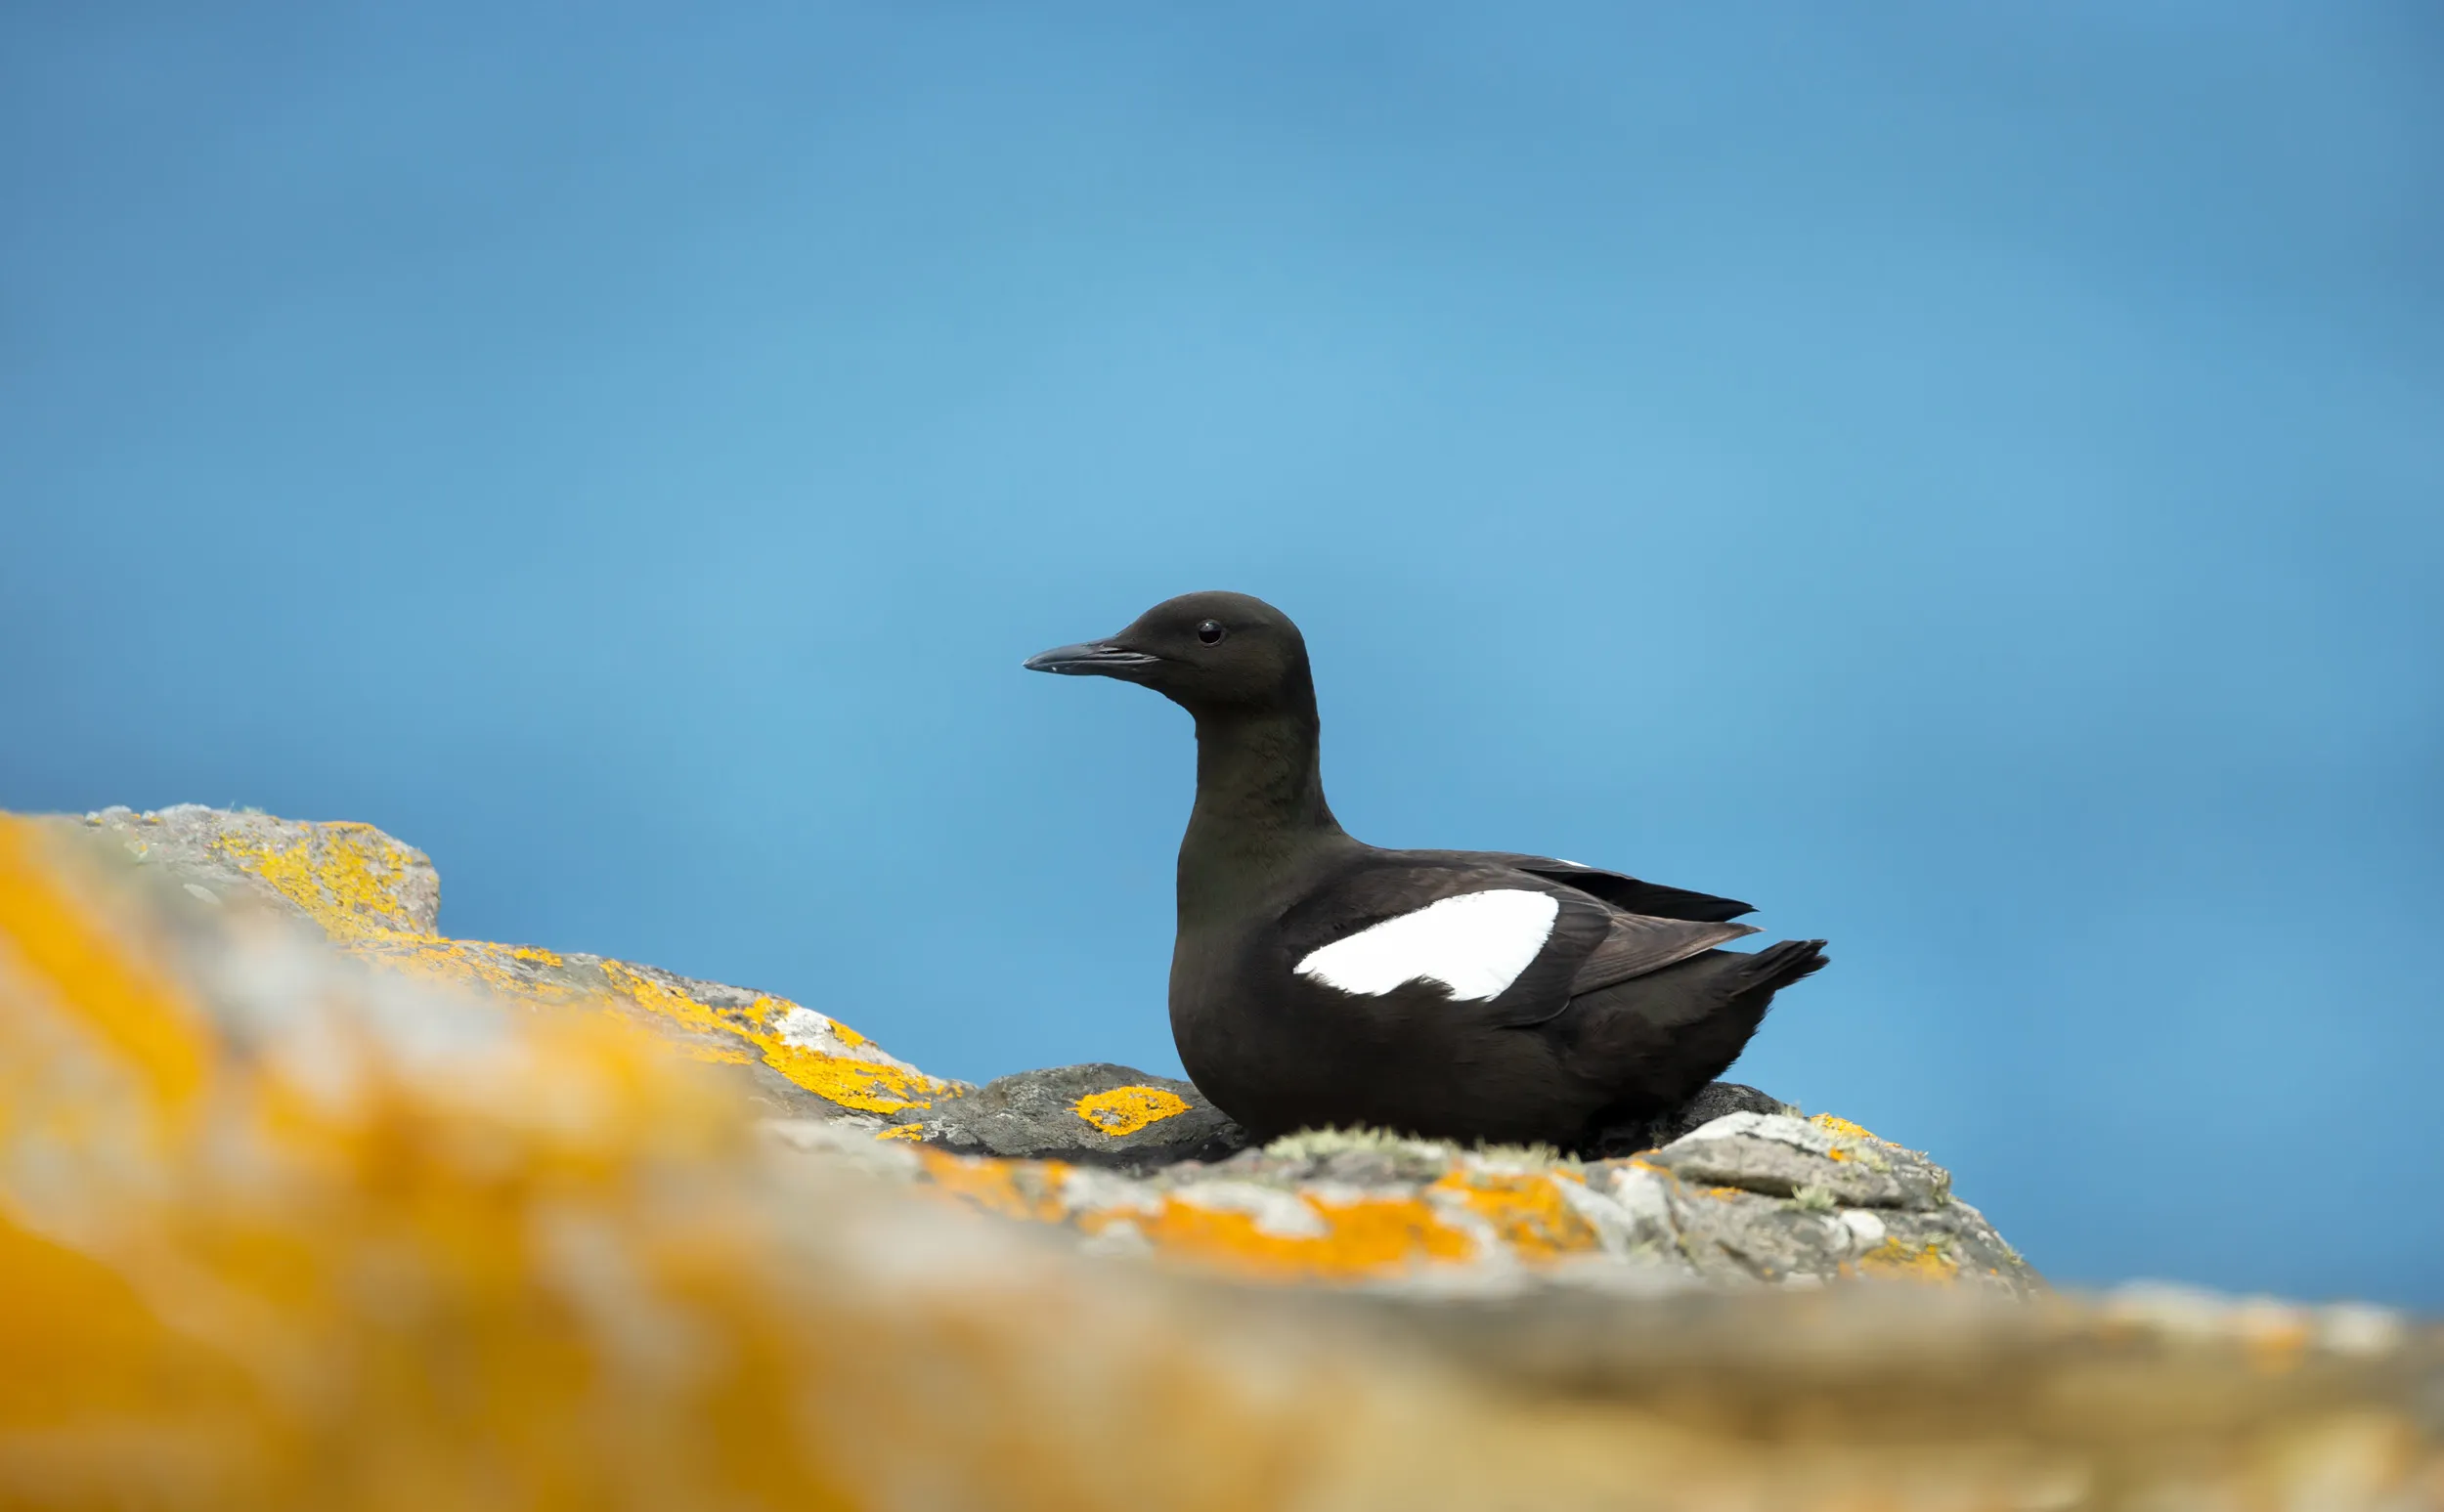 Black Guillemot perched on the edge of a rock next to the sea.